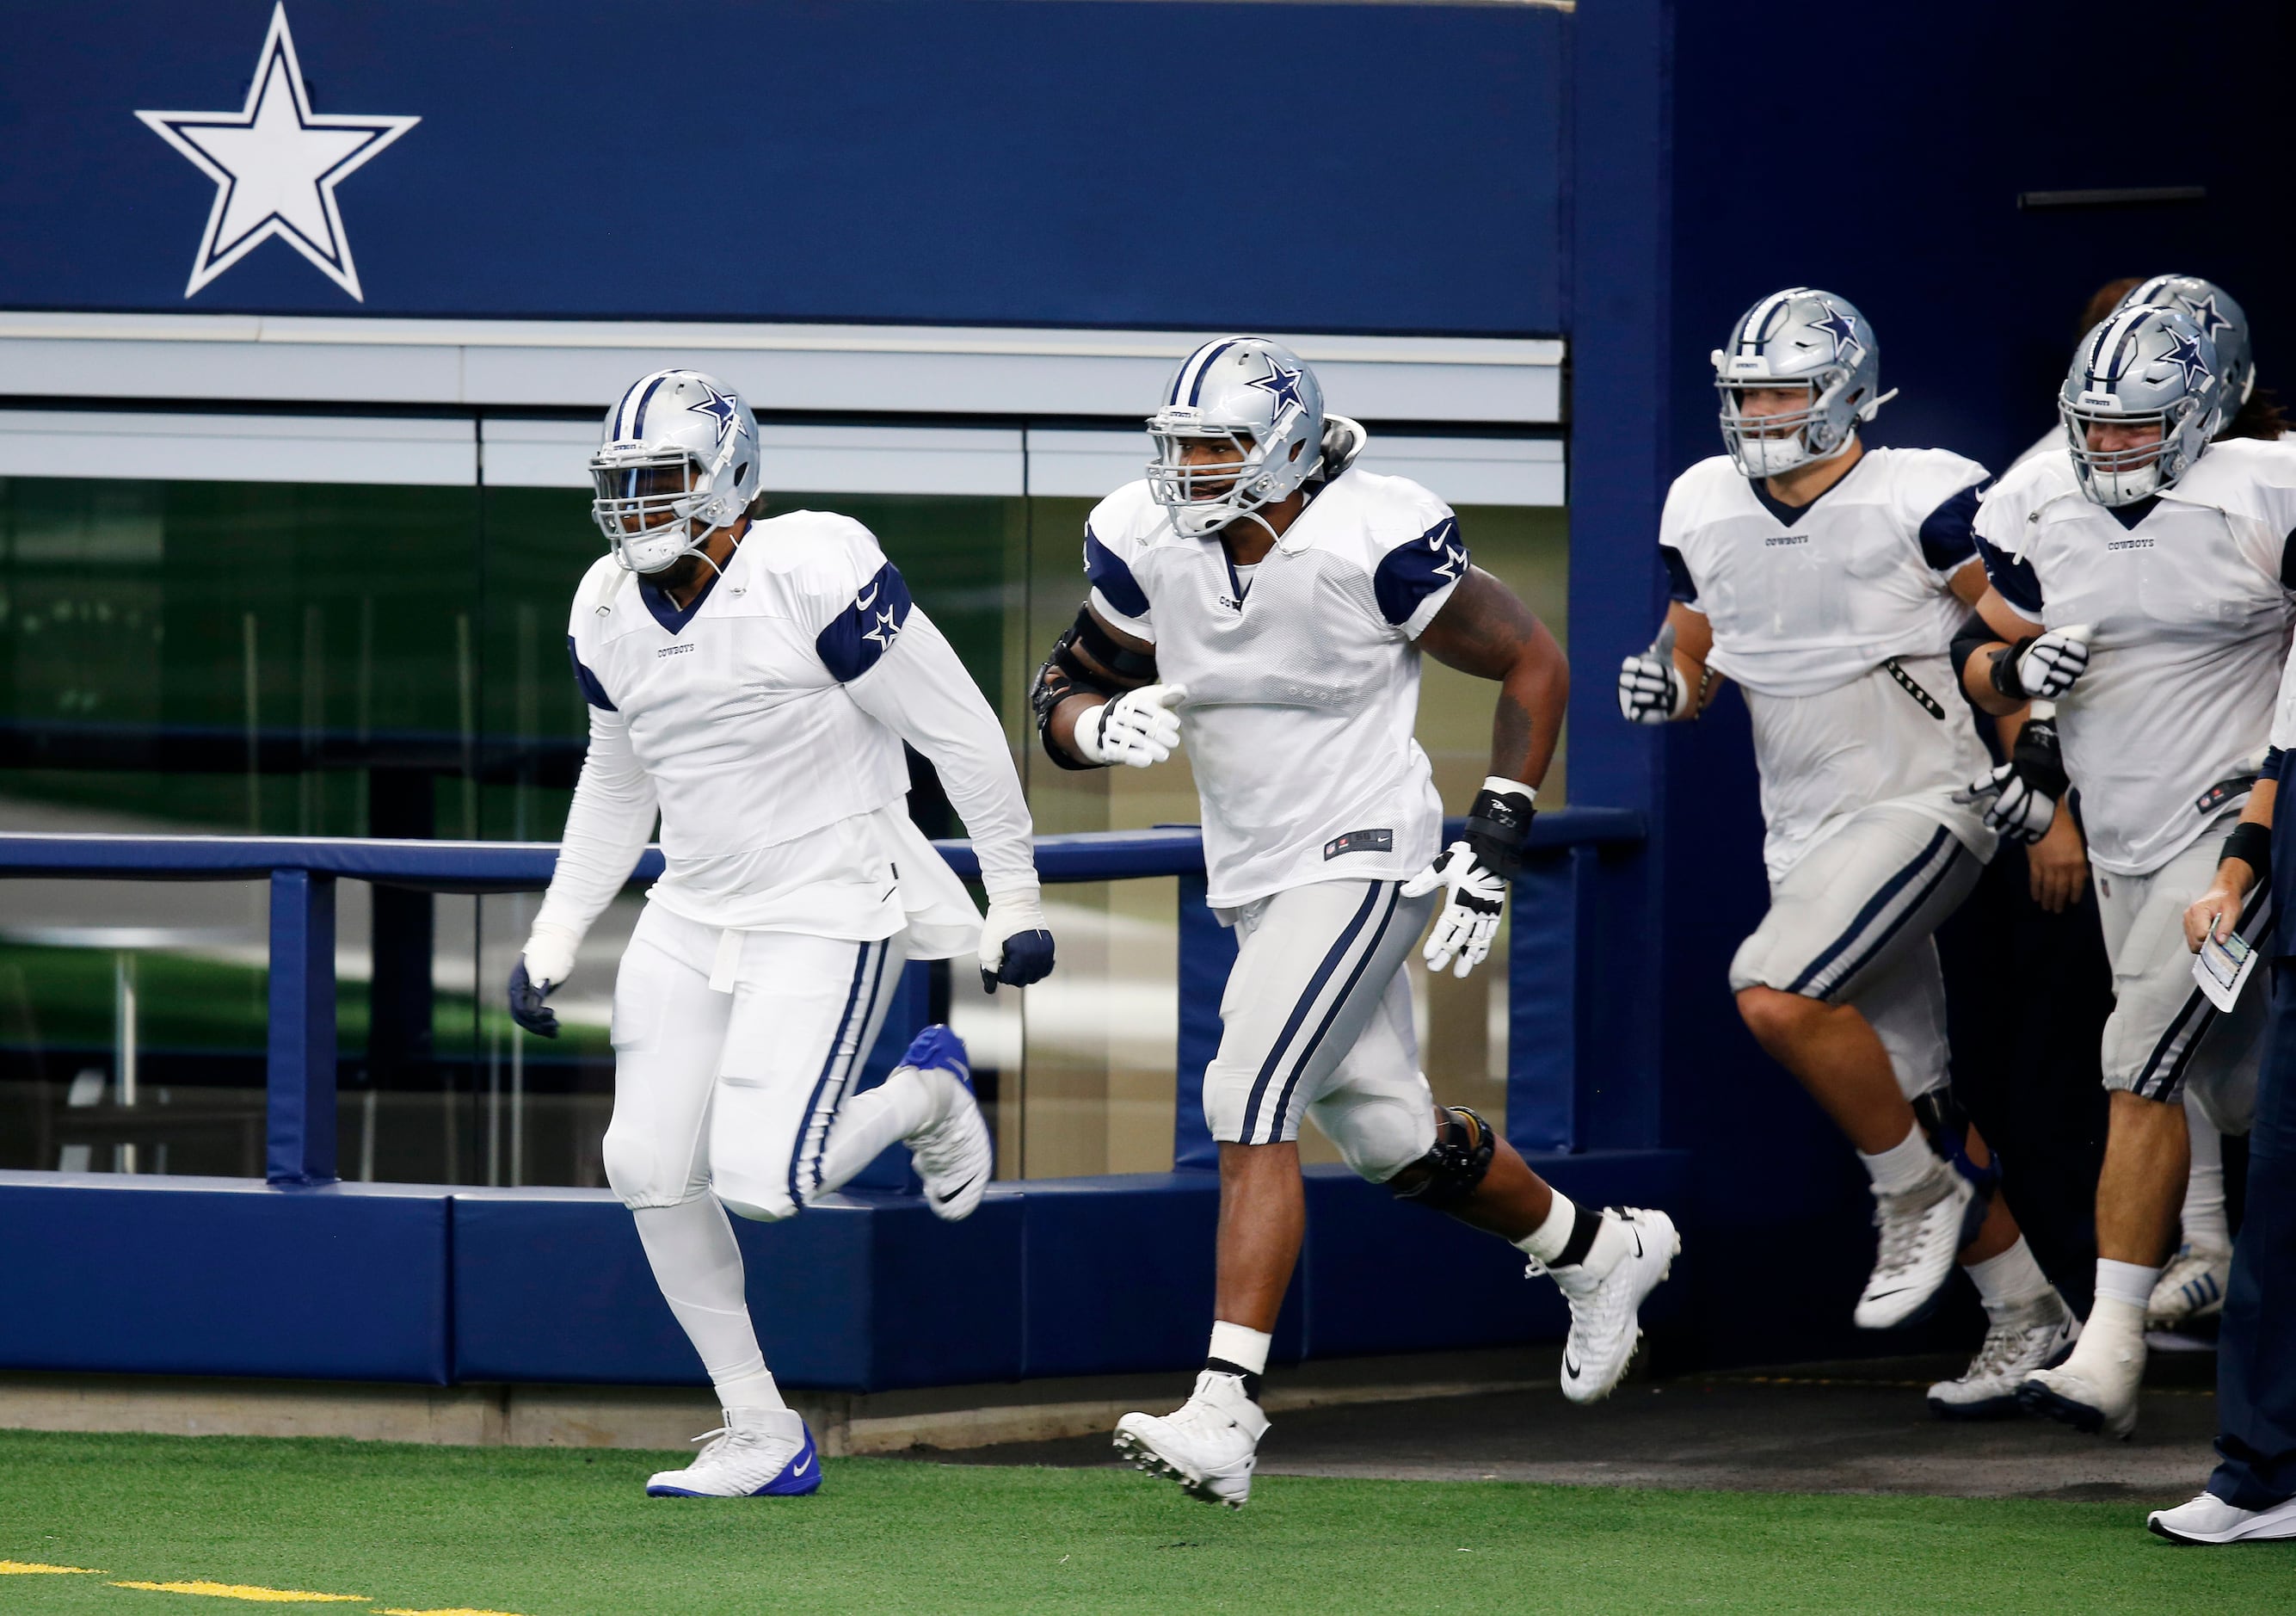 Photos: No names, numbers on jerseys for Cowboys' annual Blue